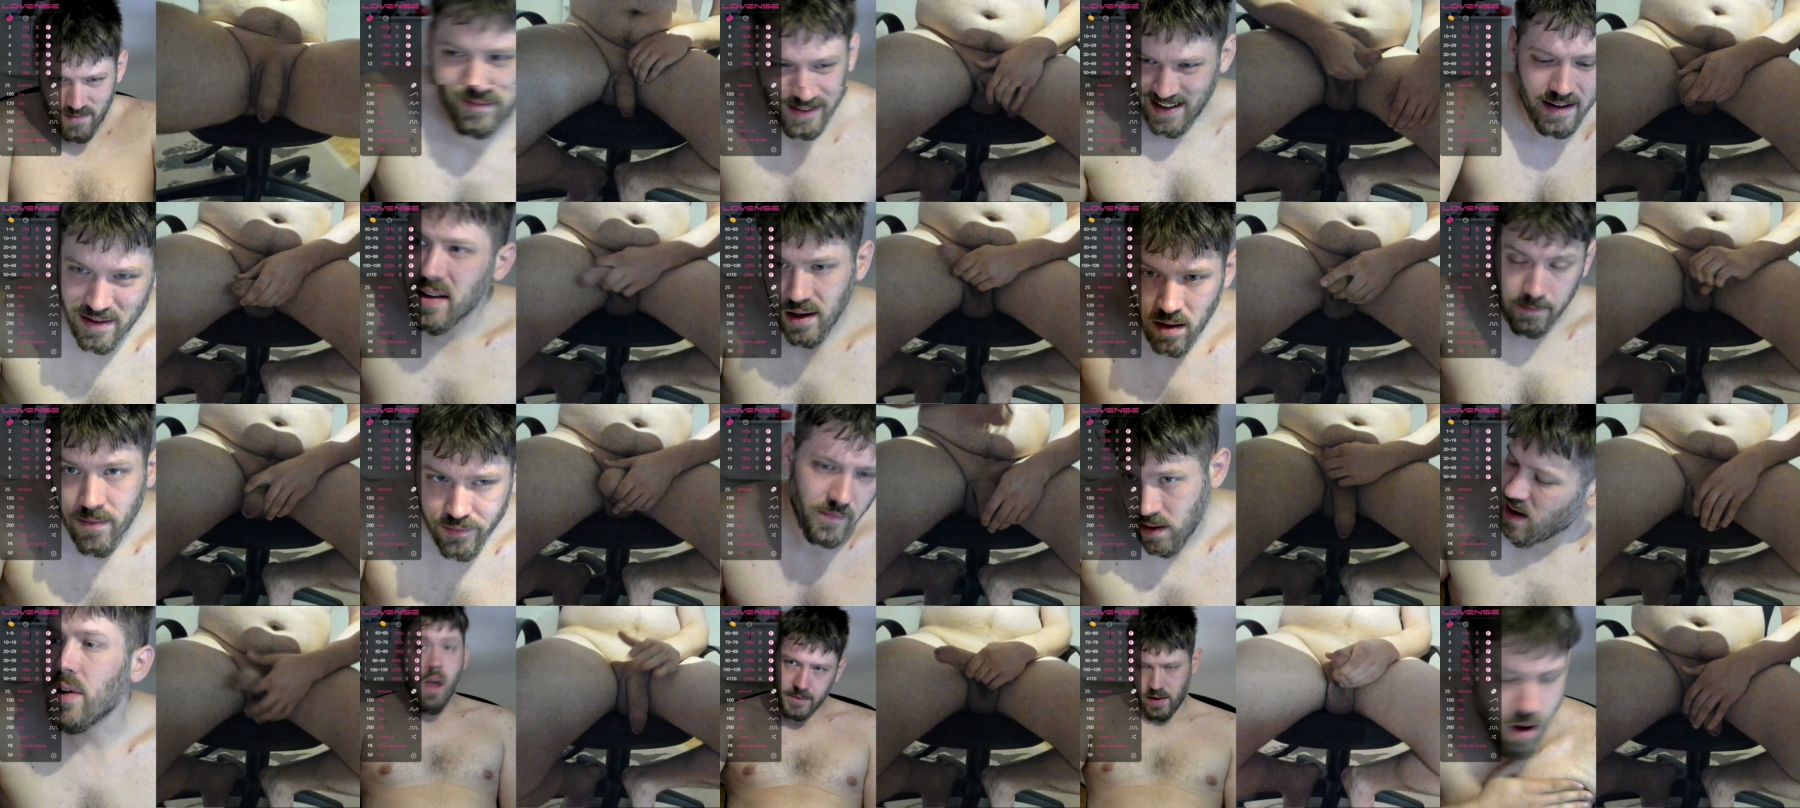 Isaac777  28-07-2021 Recorded Video Webcam